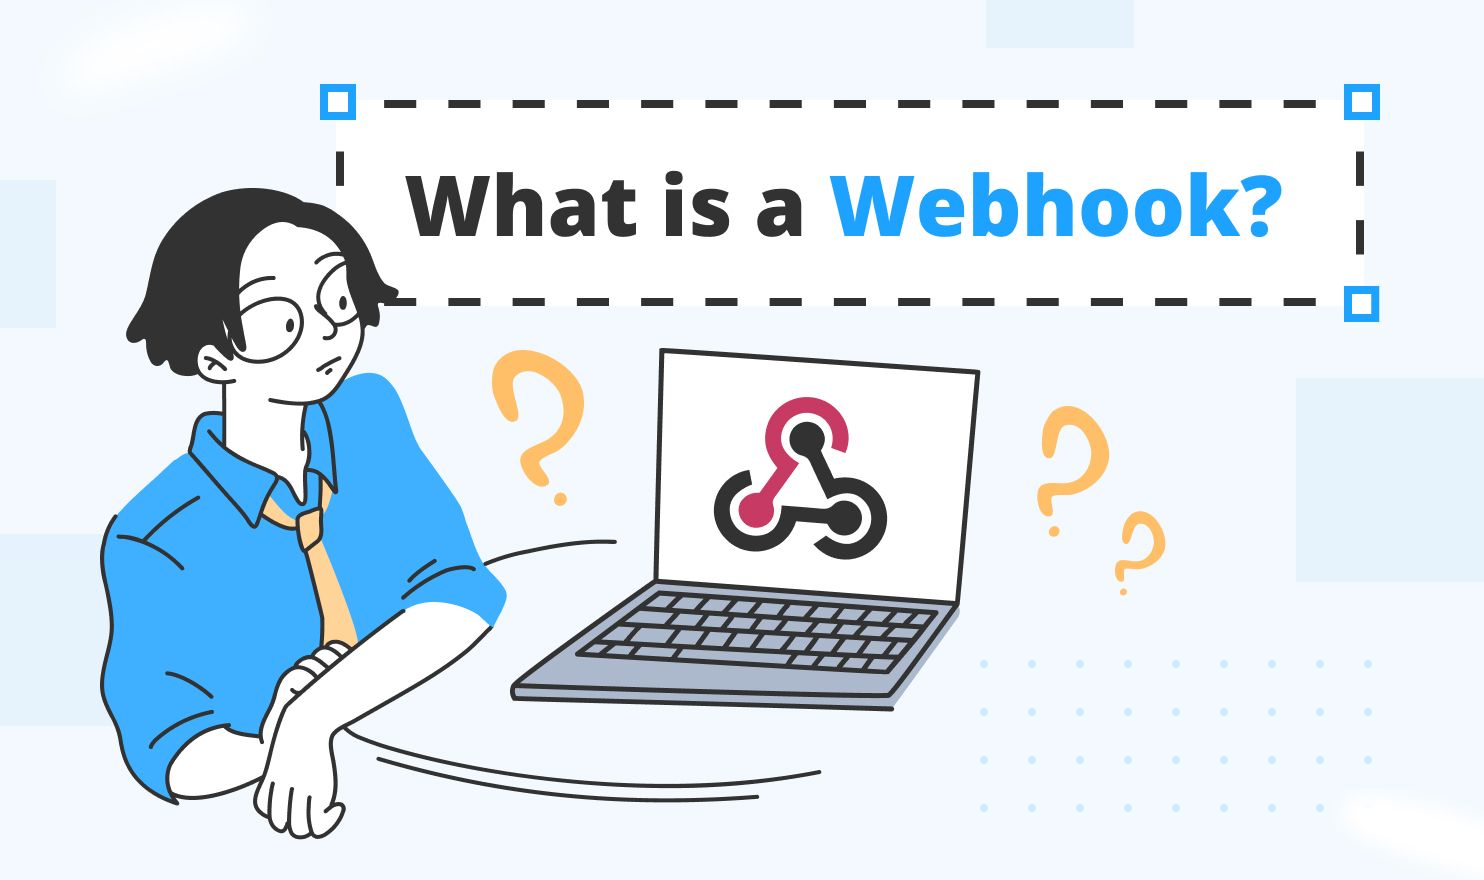 What is a Webhook?